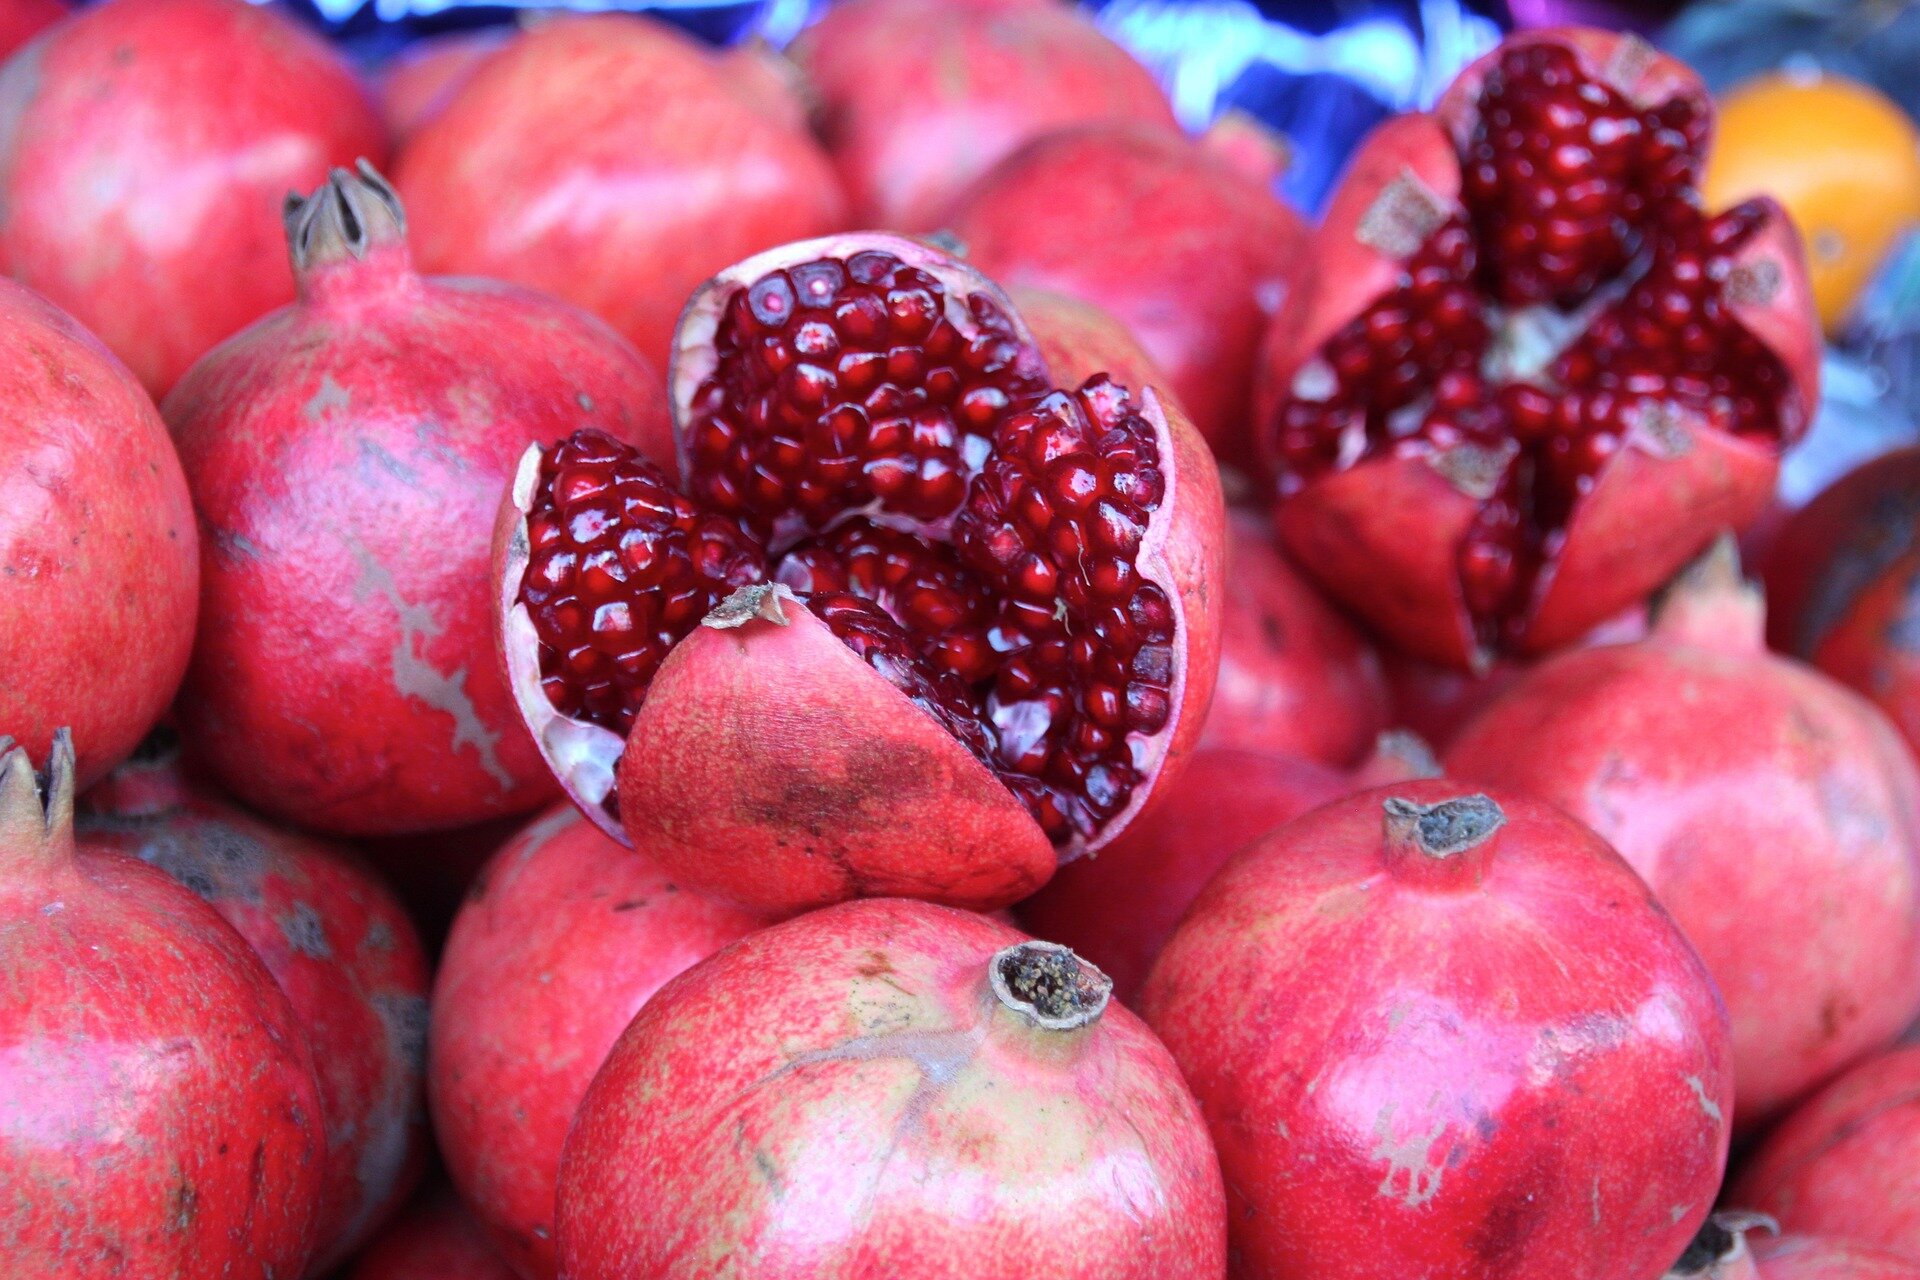 #Research says pomegranates could offer a solution to fatty liver disease